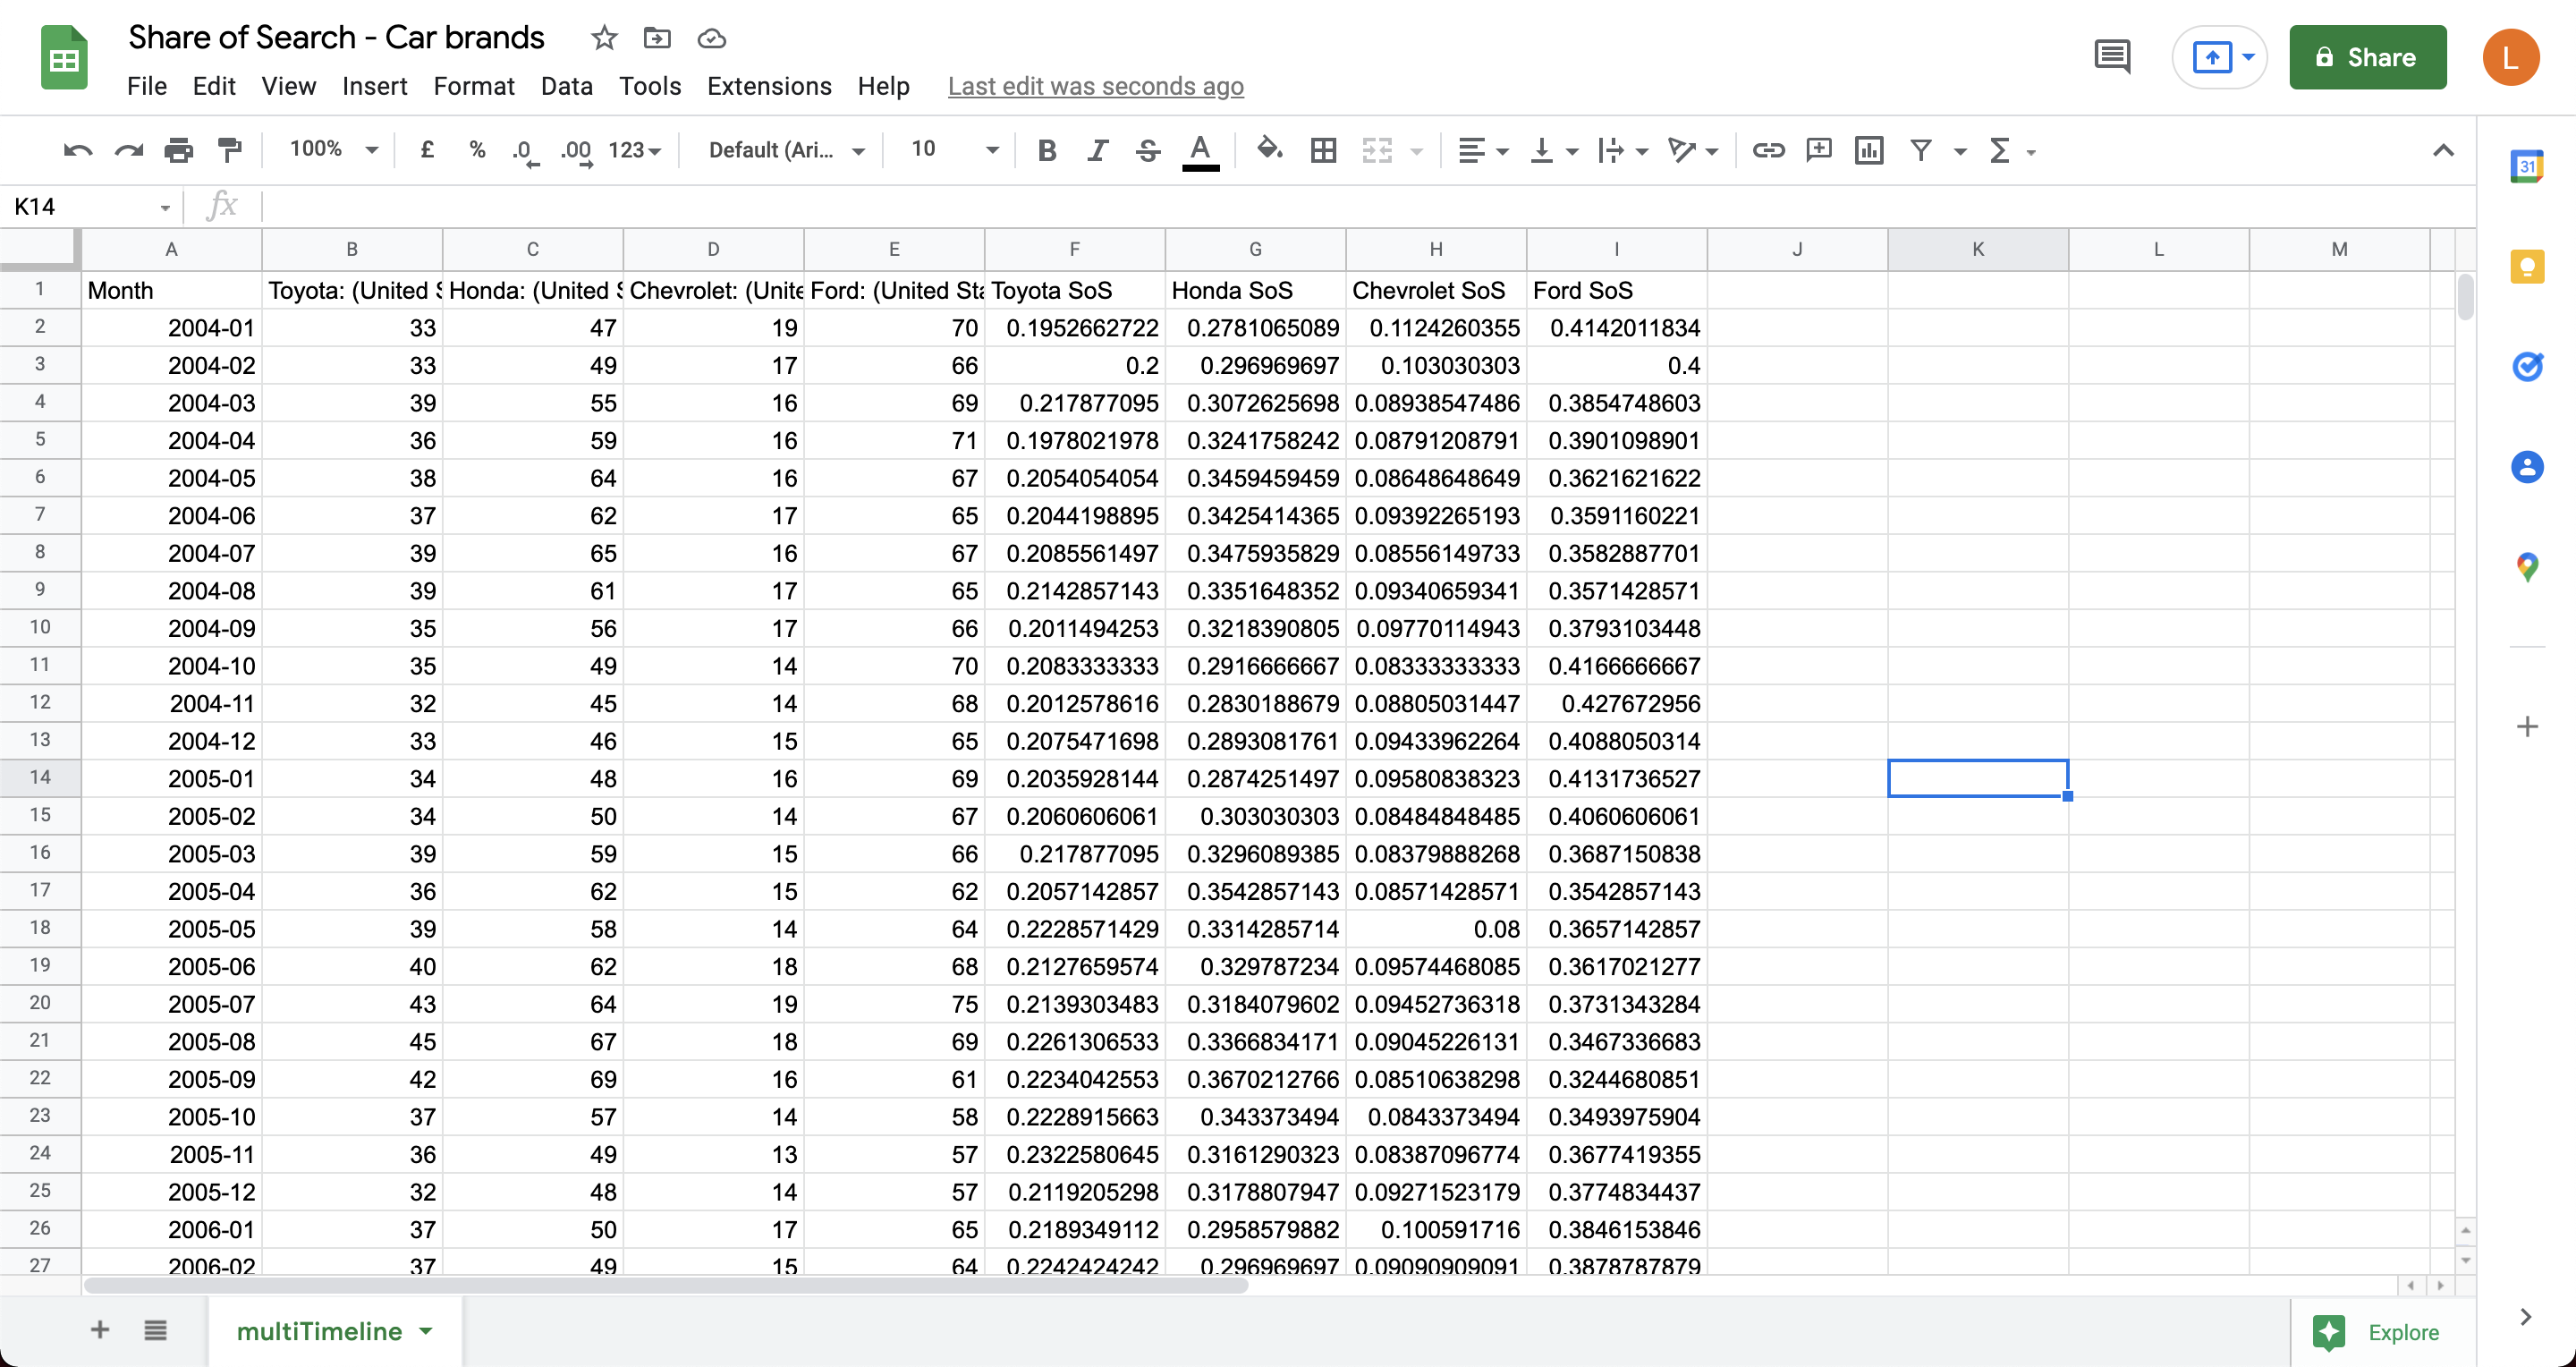 Share of Search data in Google Sheets